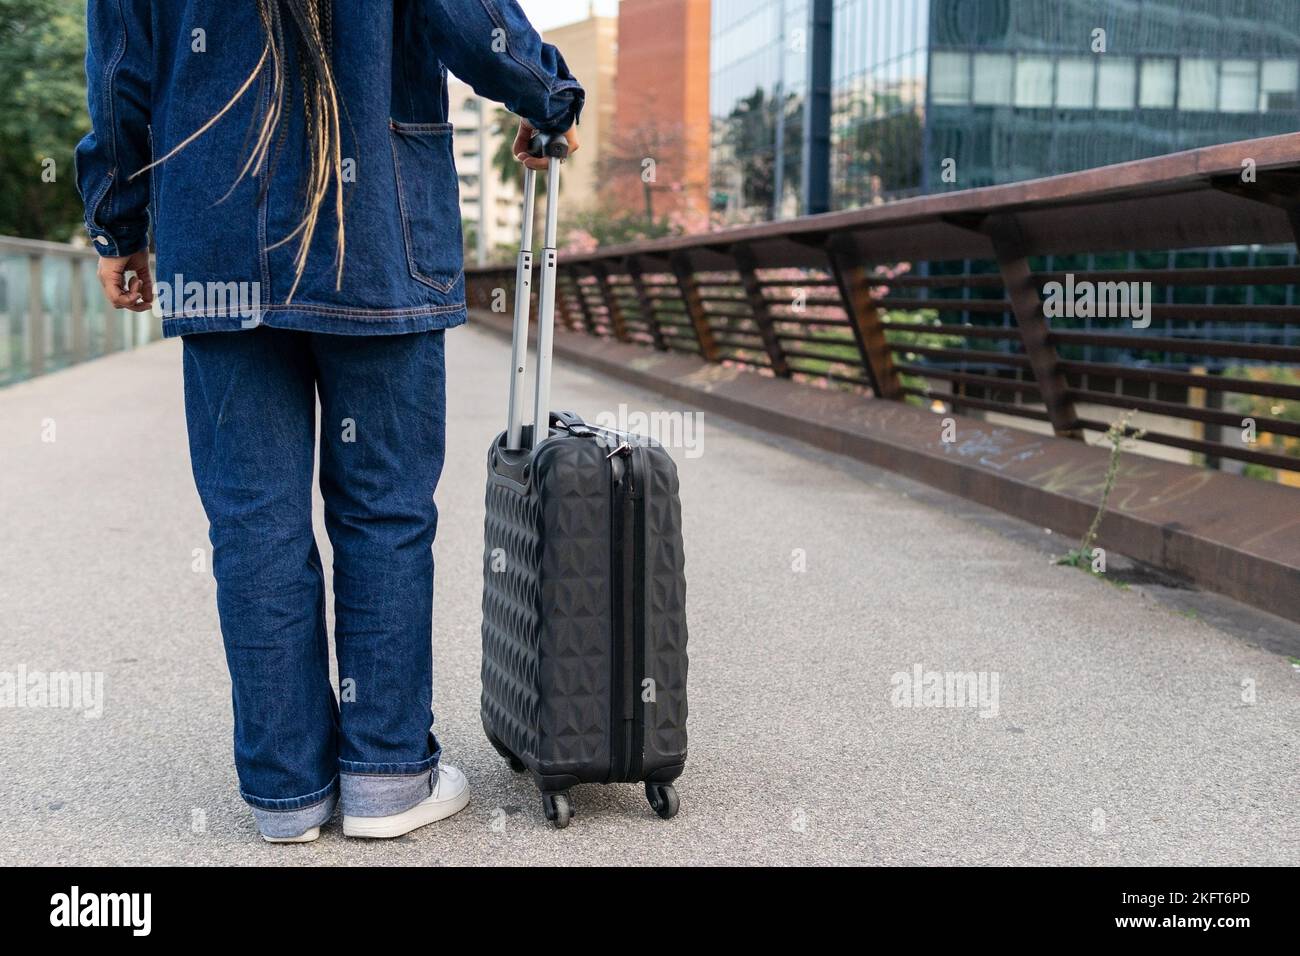 Back view of crop anonymous person in jeans and denim jacket with luggage standing on bridge near modern buildings Stock Photo